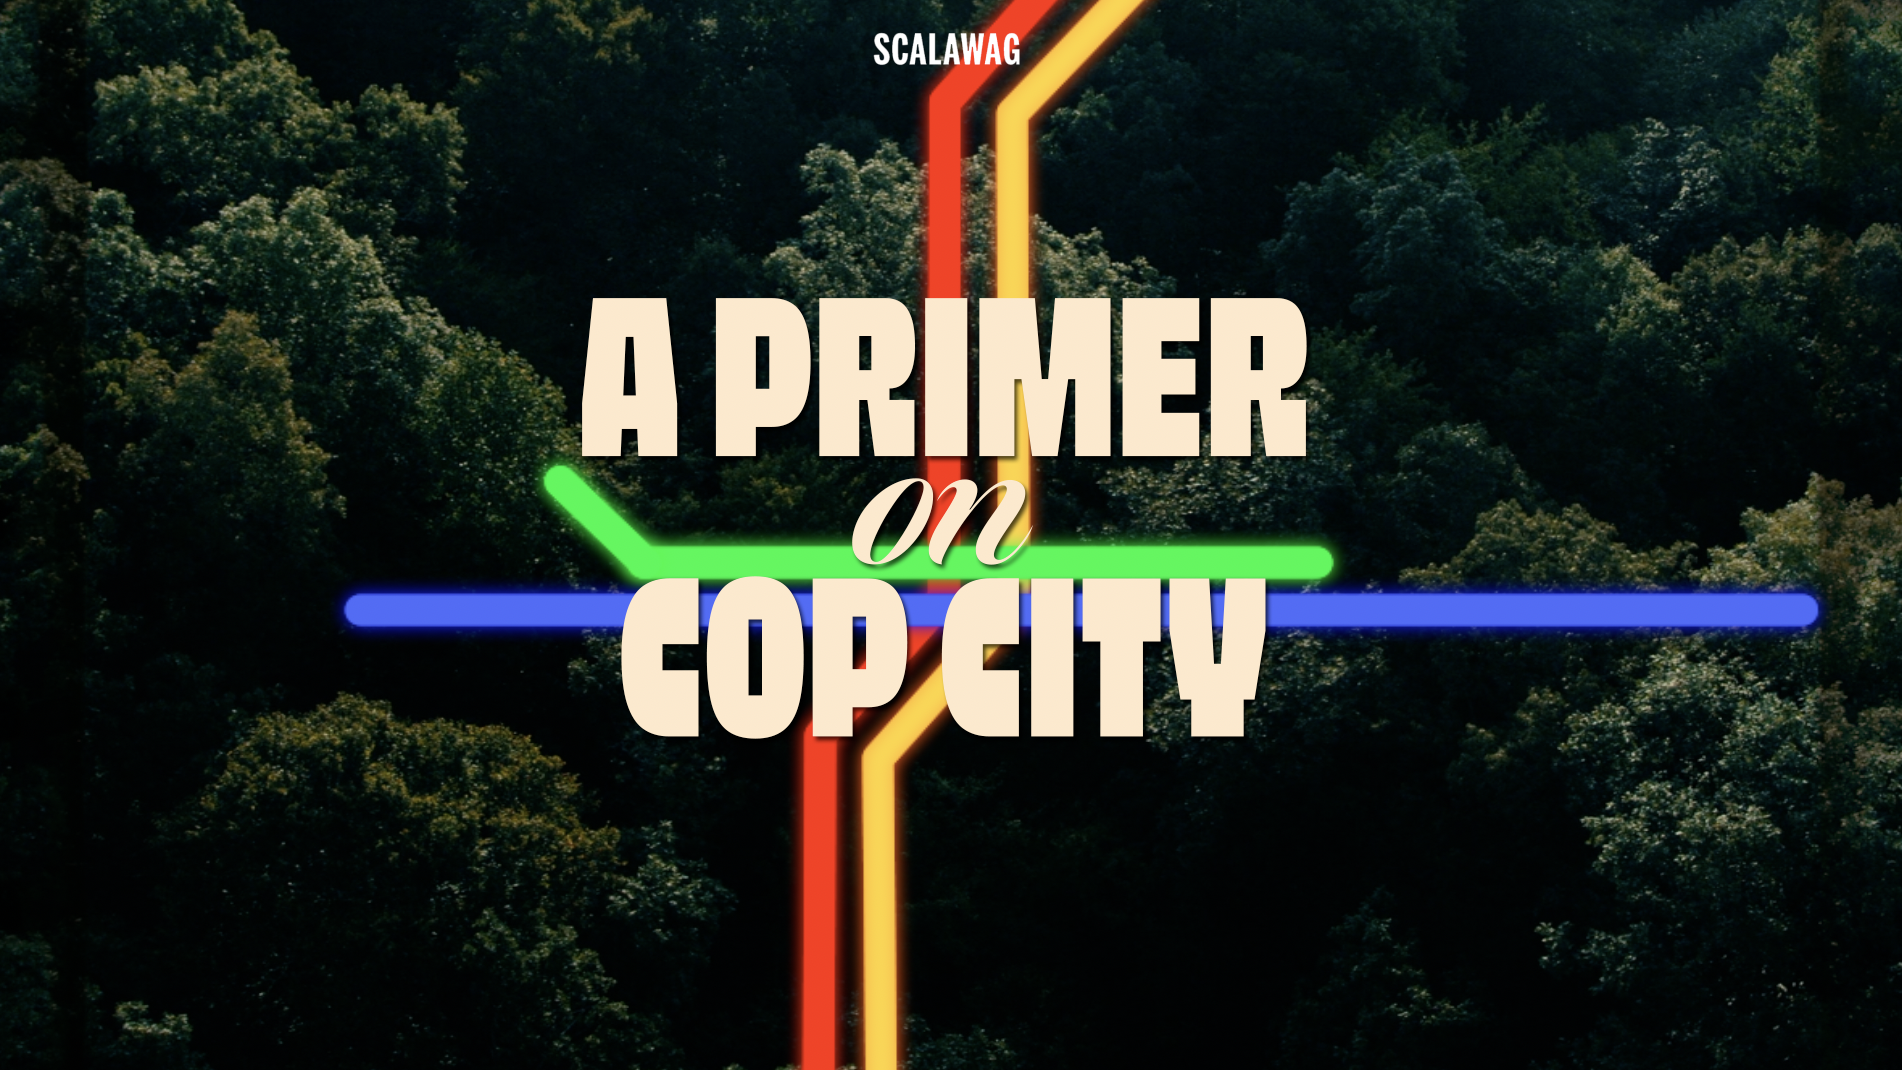 This is the Atlanta Way: a primer on Cop City